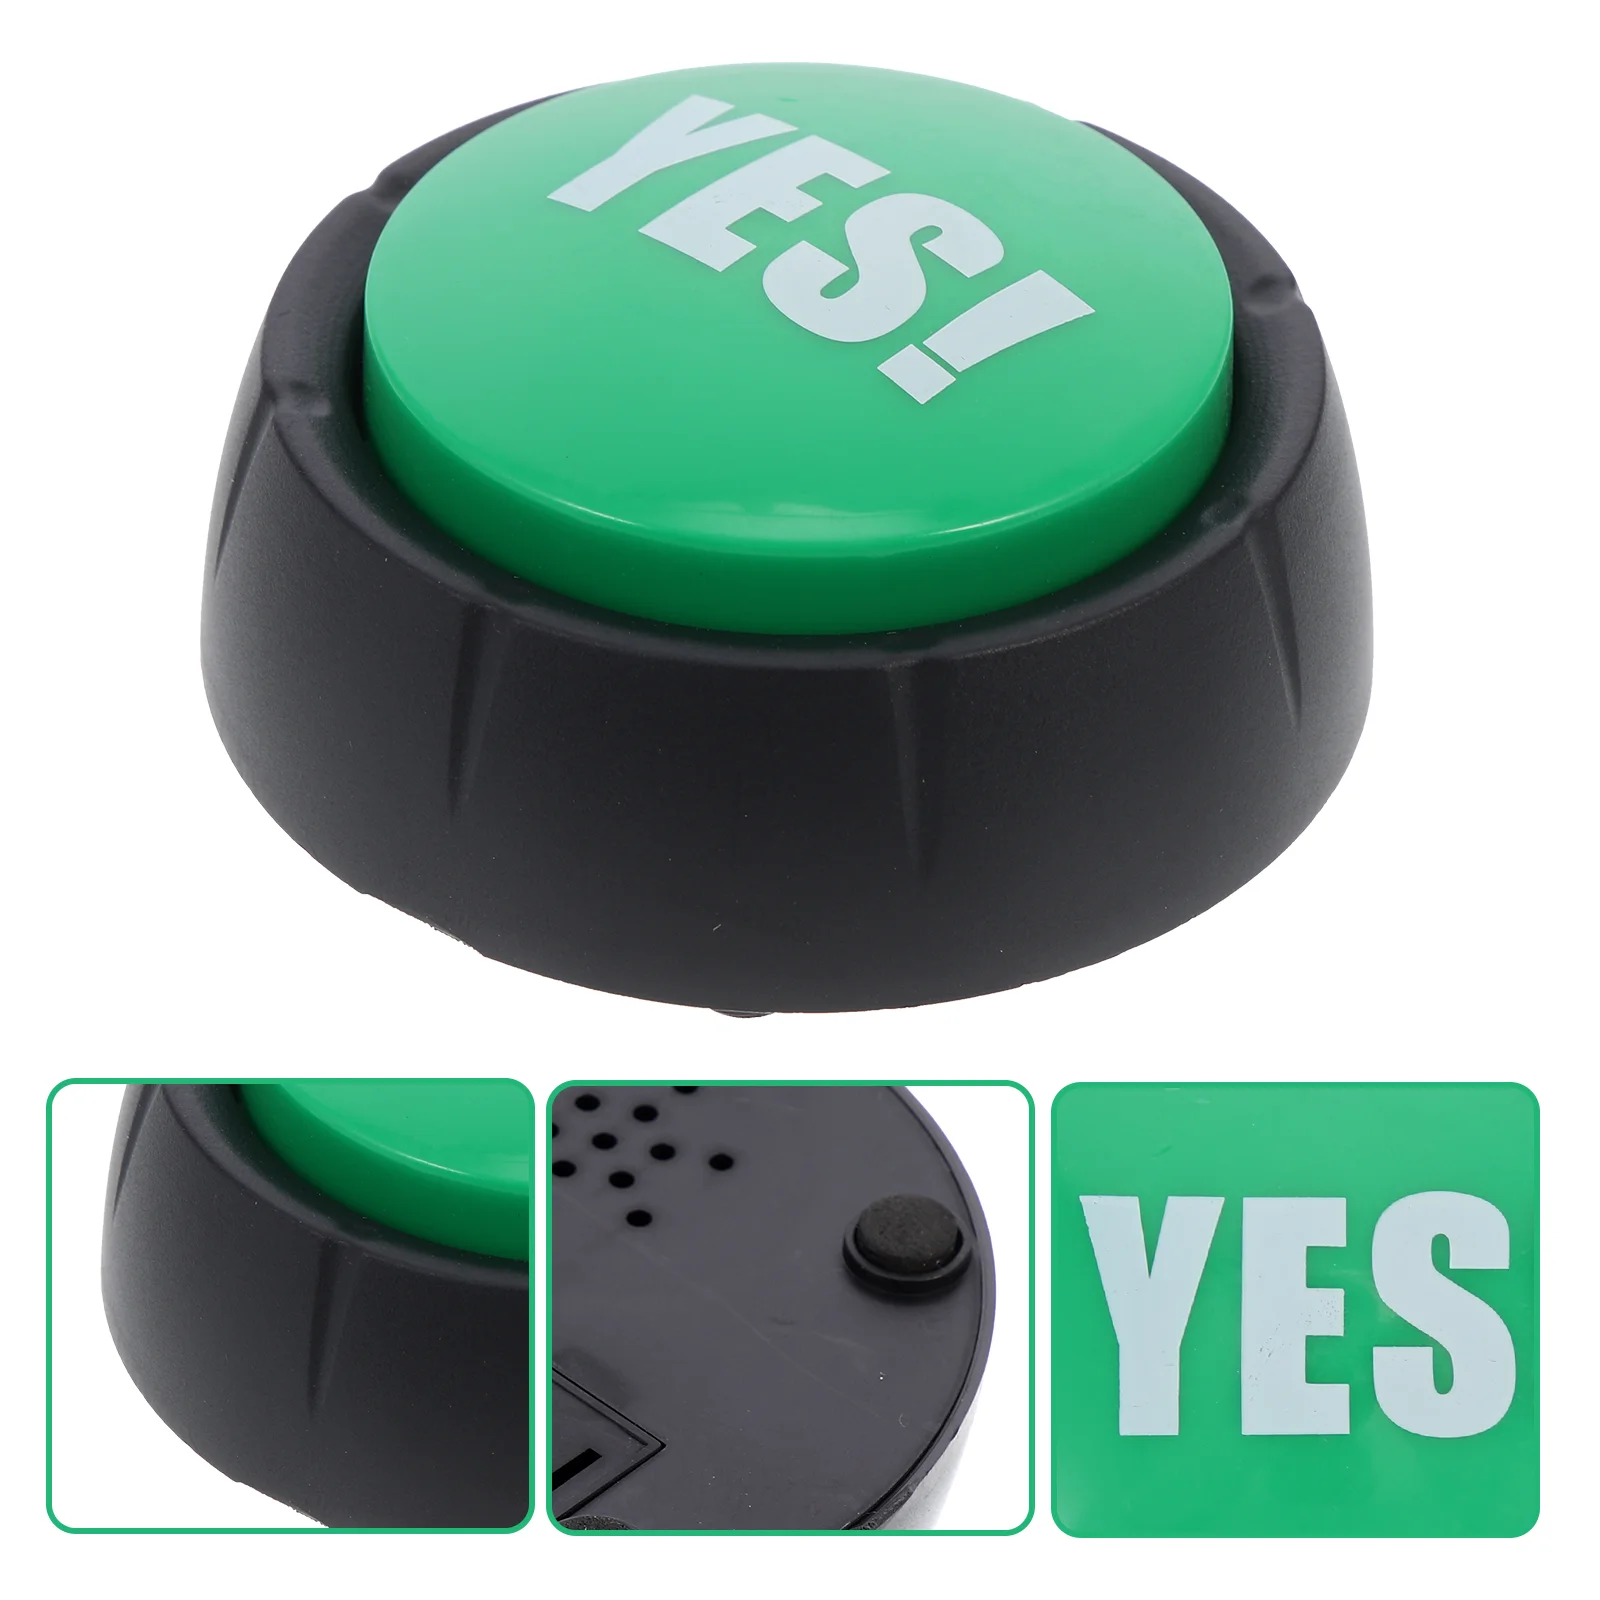 Gifts Sound Button Desktop Answer Buzzer Candy Bag Tabletop Game Toy Prank Event Party Tool Office